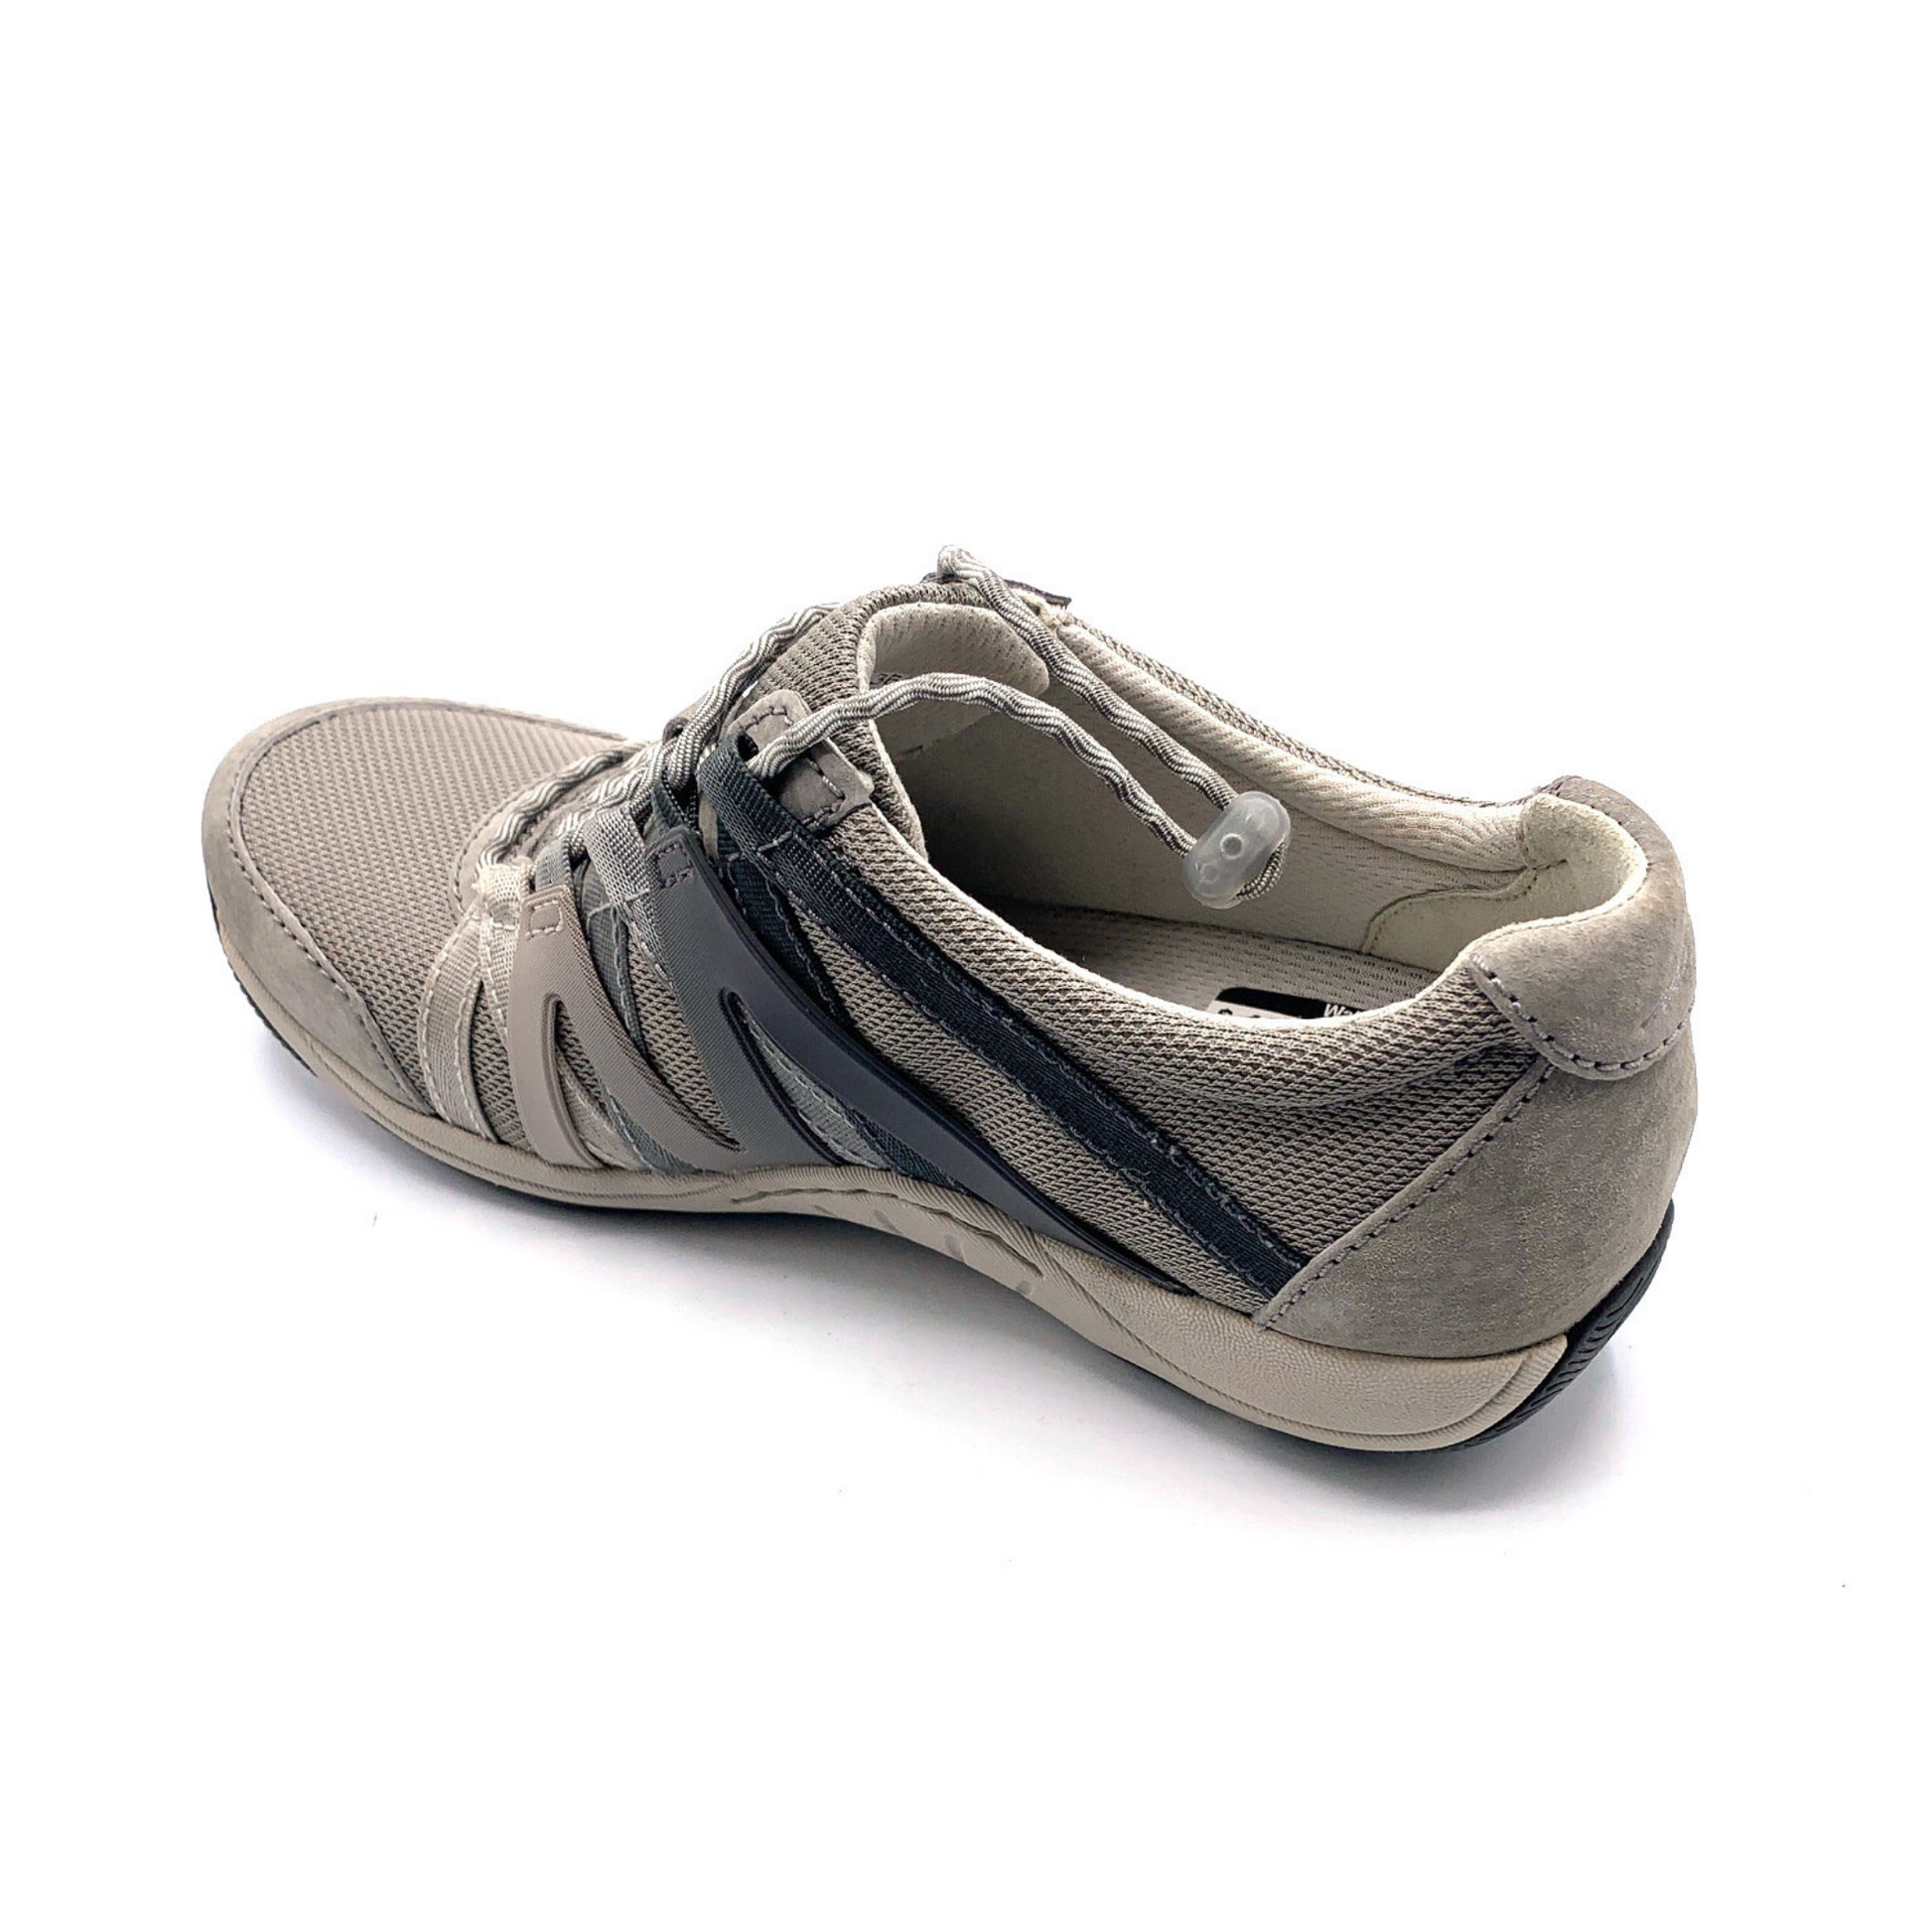 A warm grey sneaker viewed from a left-top angle. The shoe has grey cord-like laces, a mesh top, suede detailing, and an Ombre zig-zagged side pattern.